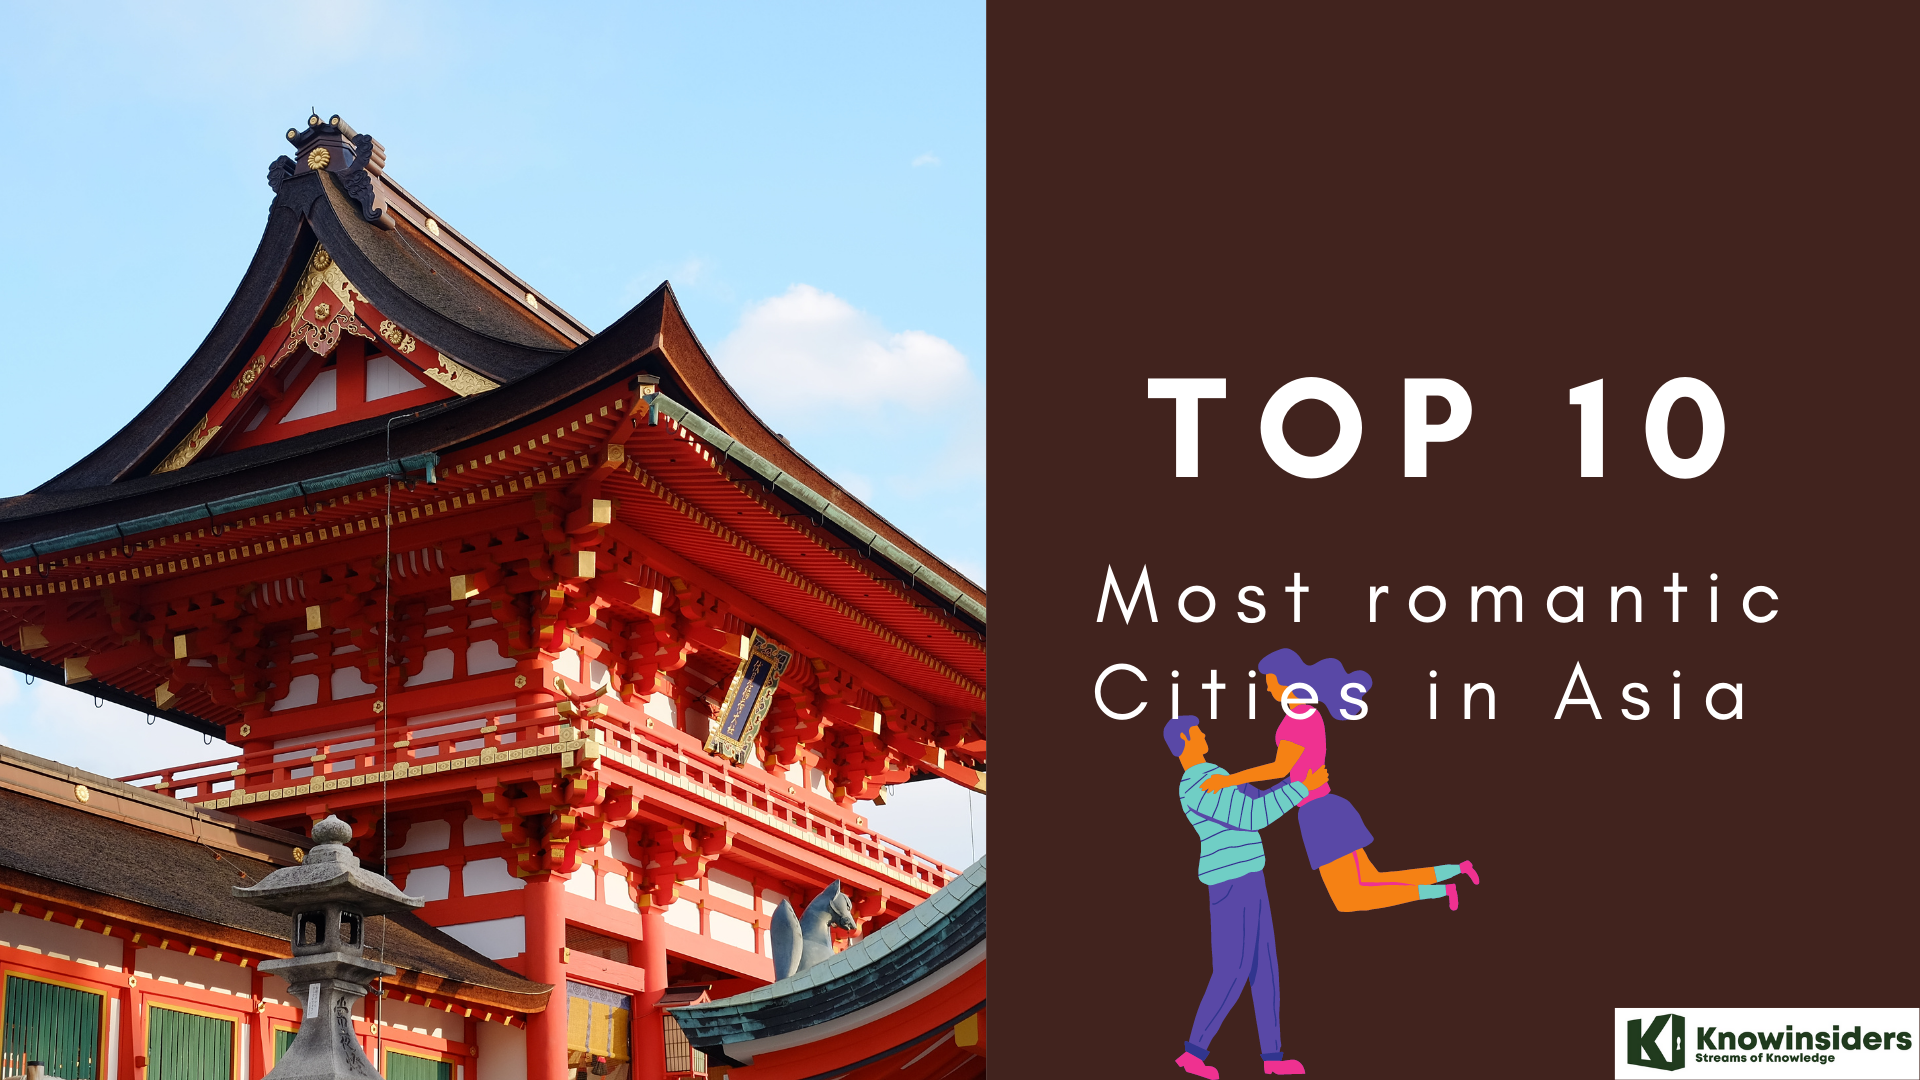 Top 10 Most Romantic Cities in Asia